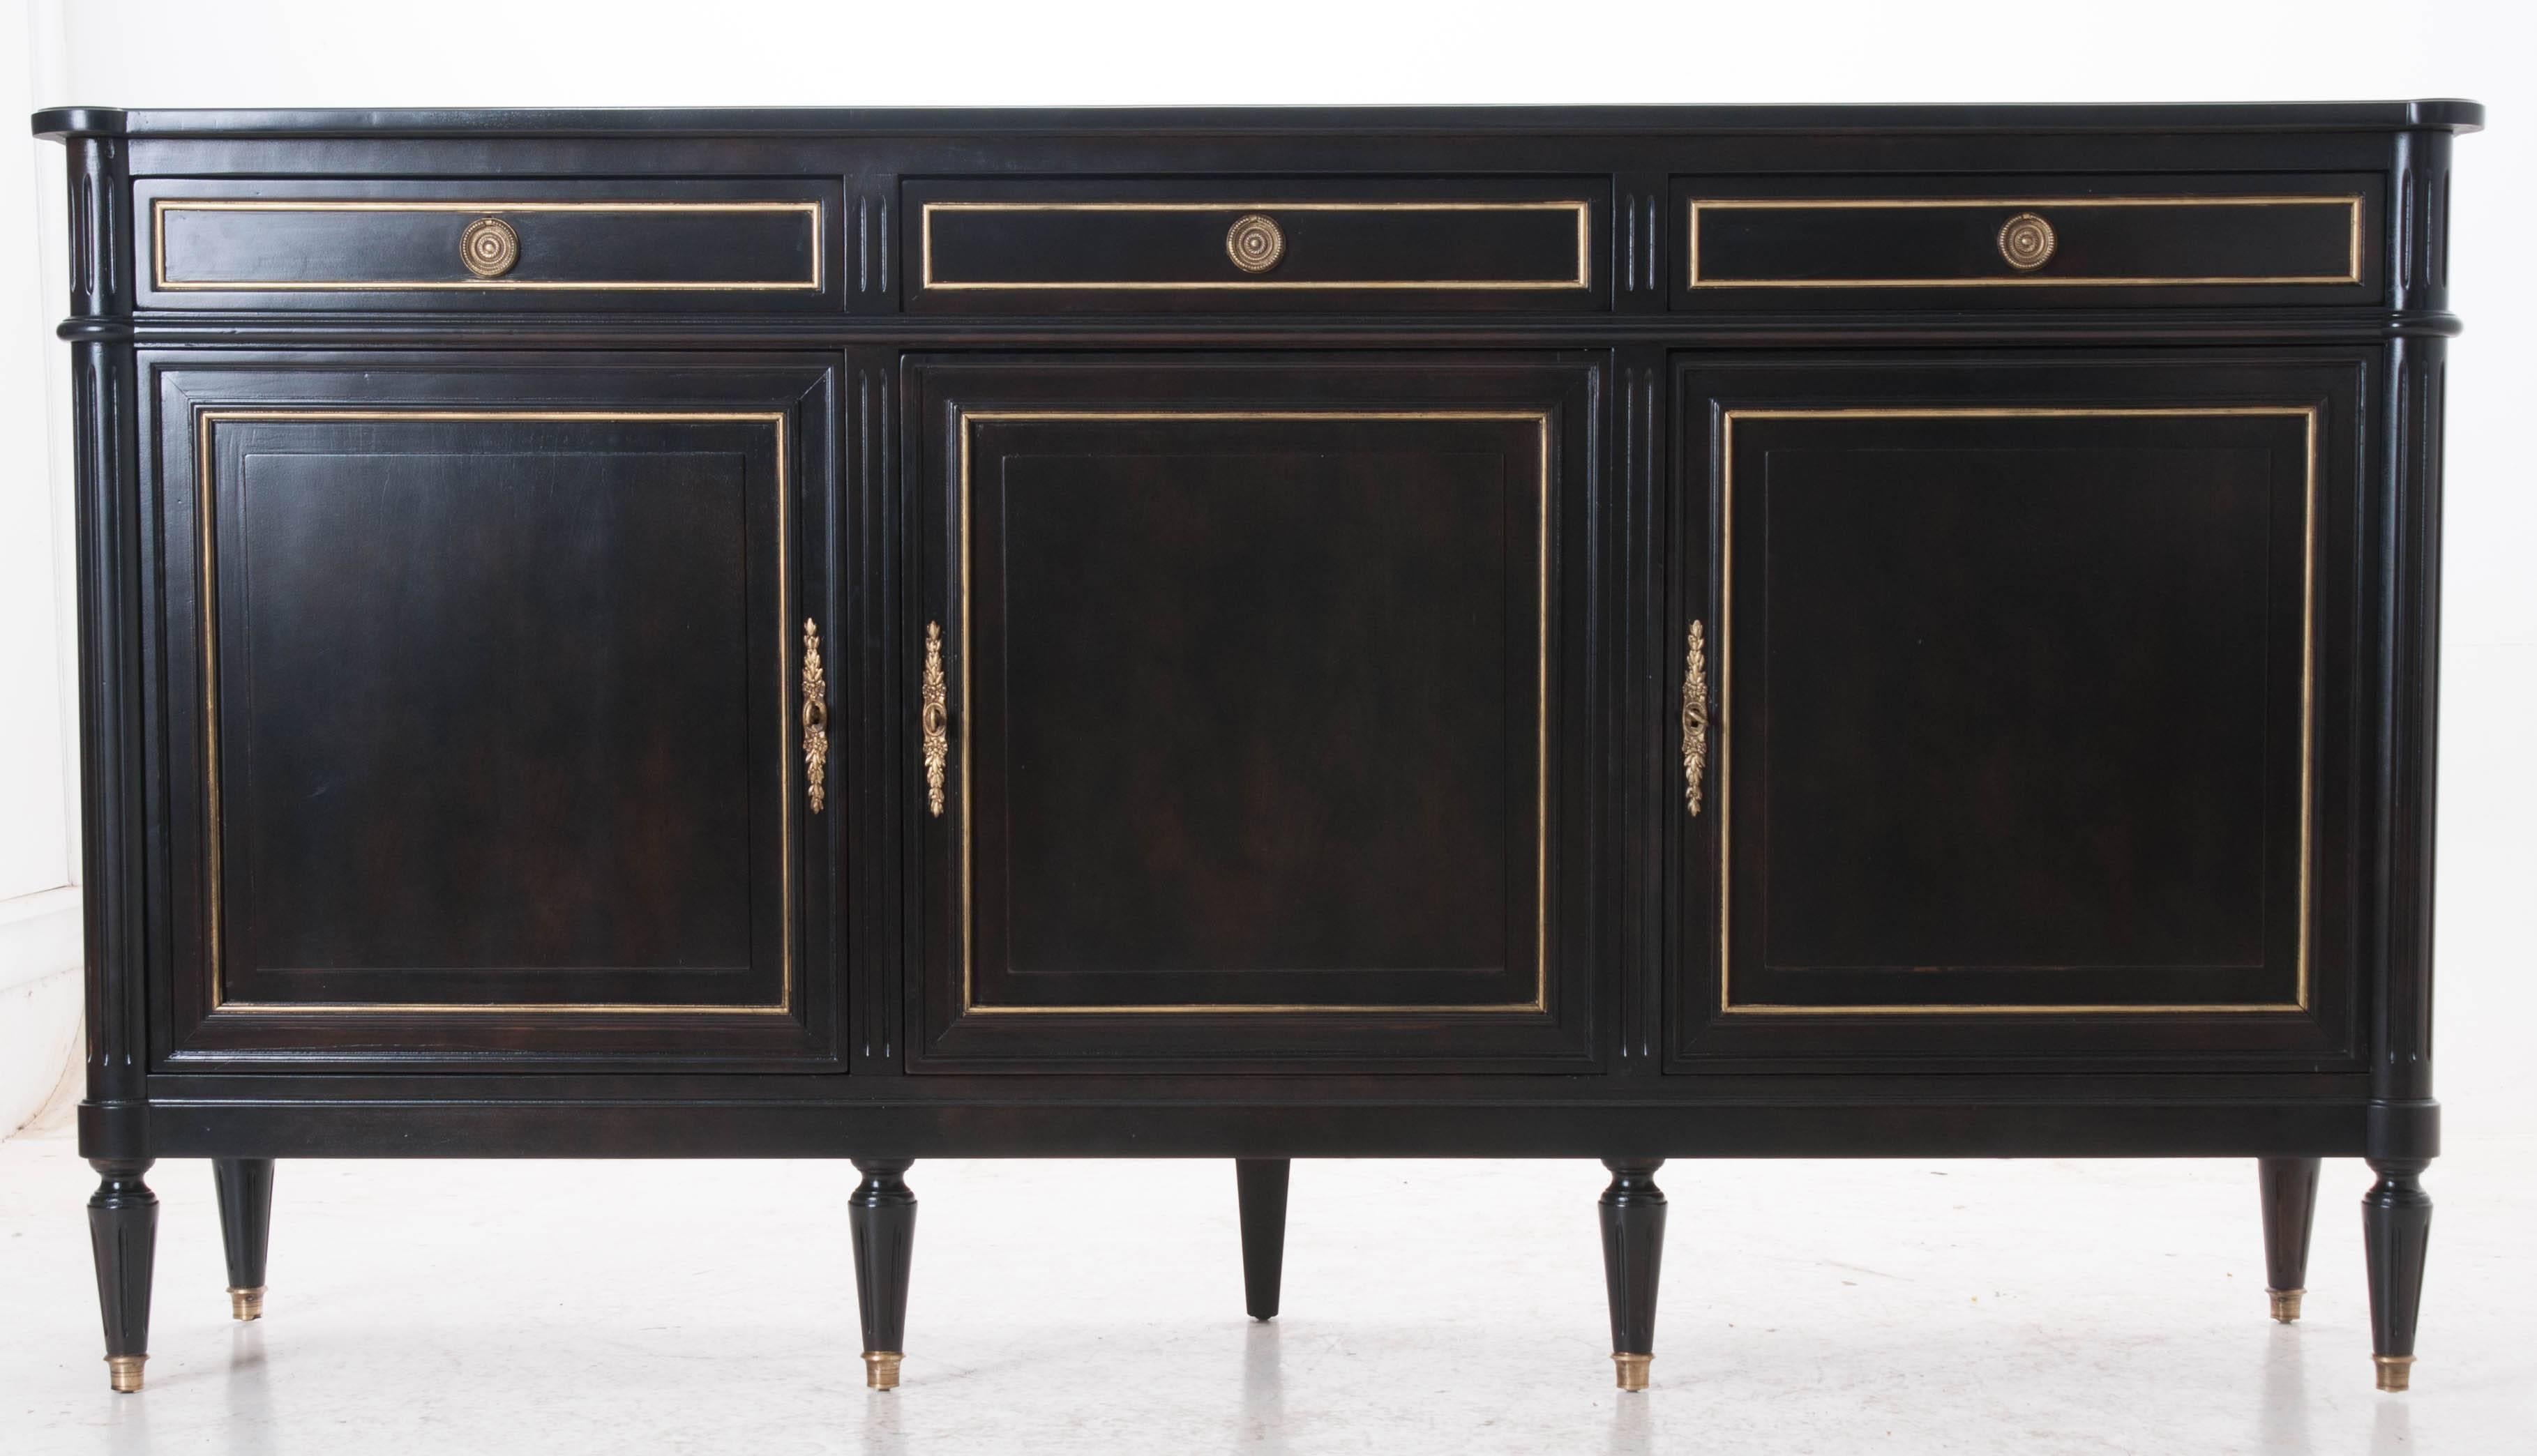 This absolutely stunning Louis XVI style enfilade has been expertly refinished in a matte black ebony with gold trimmed panels on front doors, drawers and side panels. Gilt brass hardware and gilt brass capped feet continue the gilt with ebony